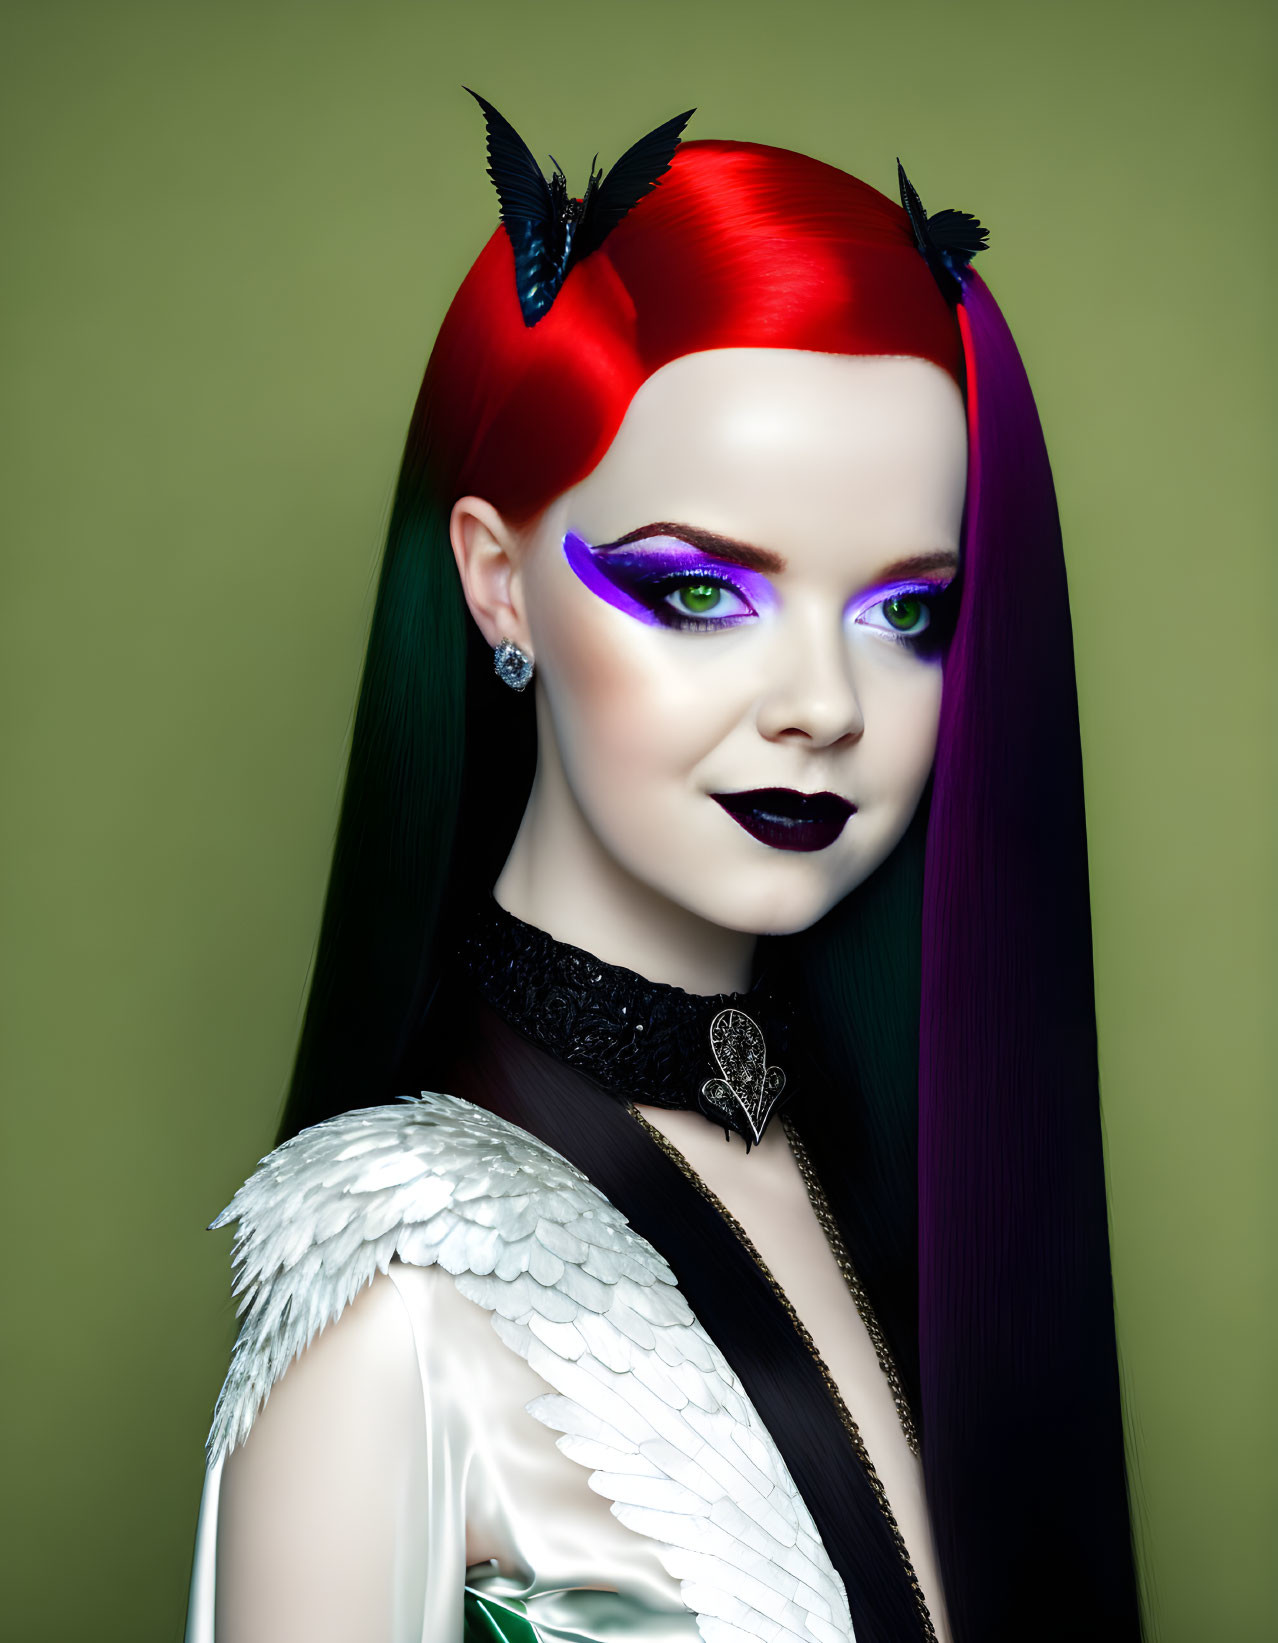 Vibrant red and black hair, purple eye makeup, winged black accents, black necklace,